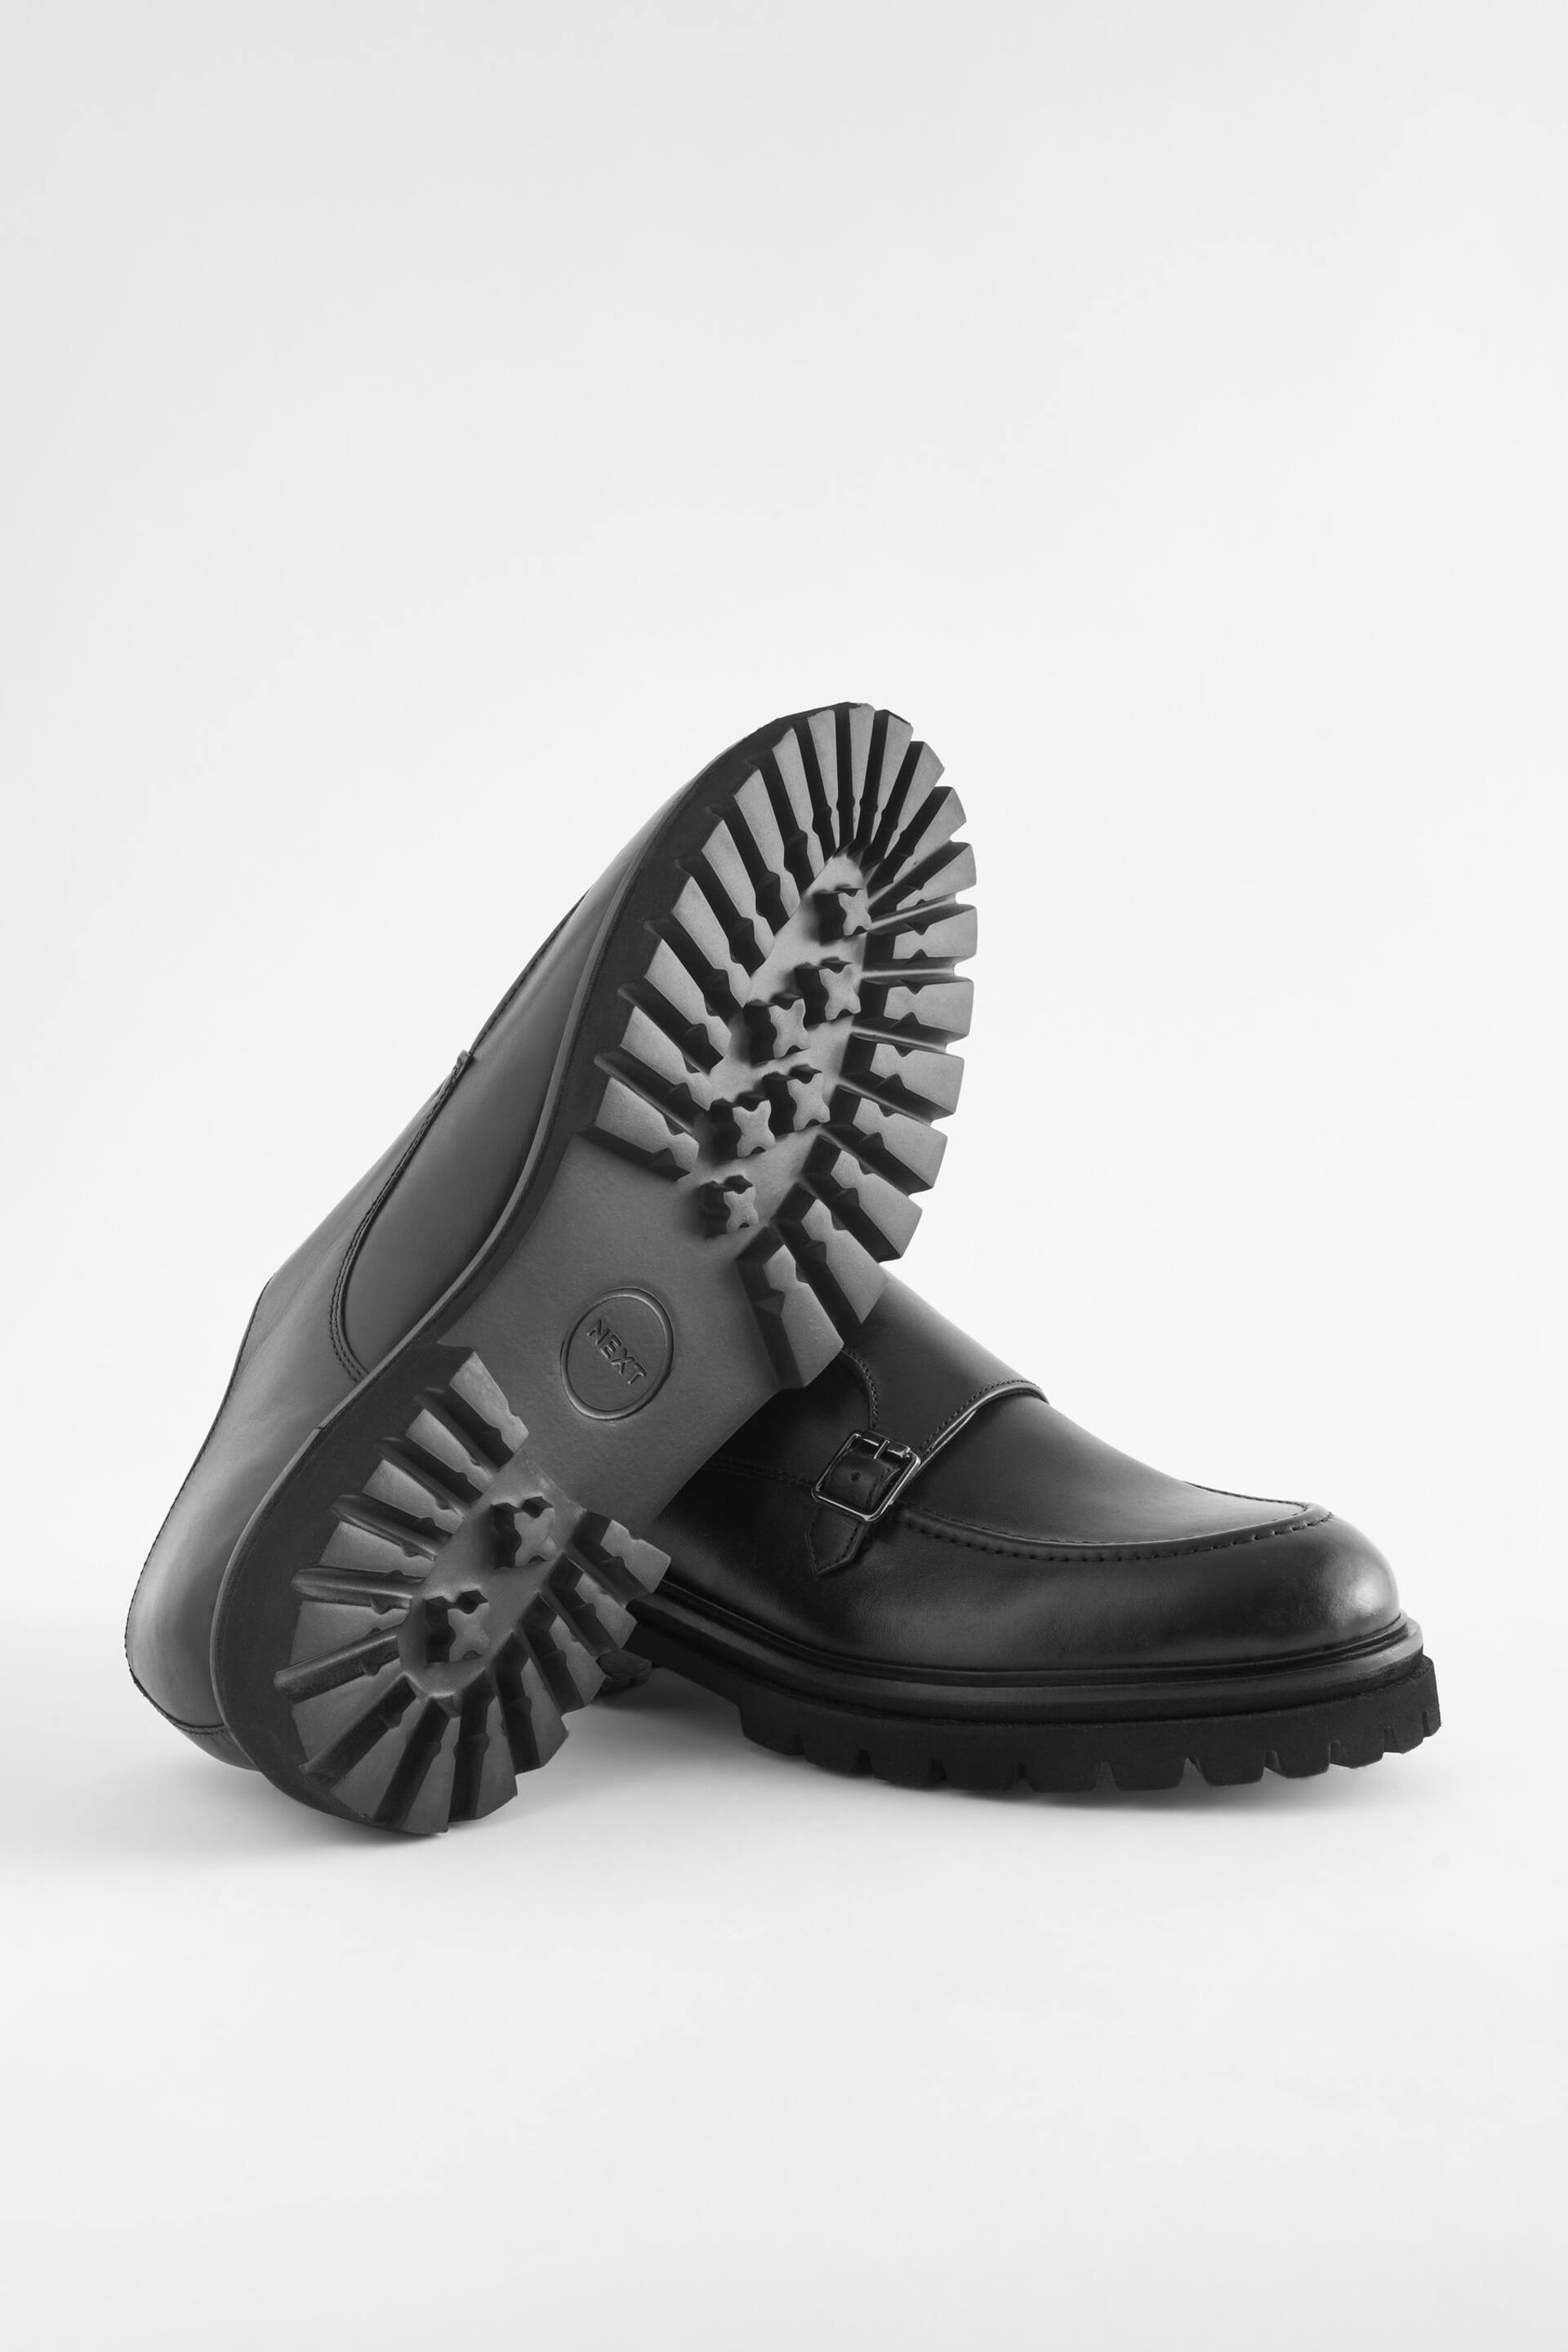 Black EDIT Cleated Leather Monk Shoes - Image 5 of 7